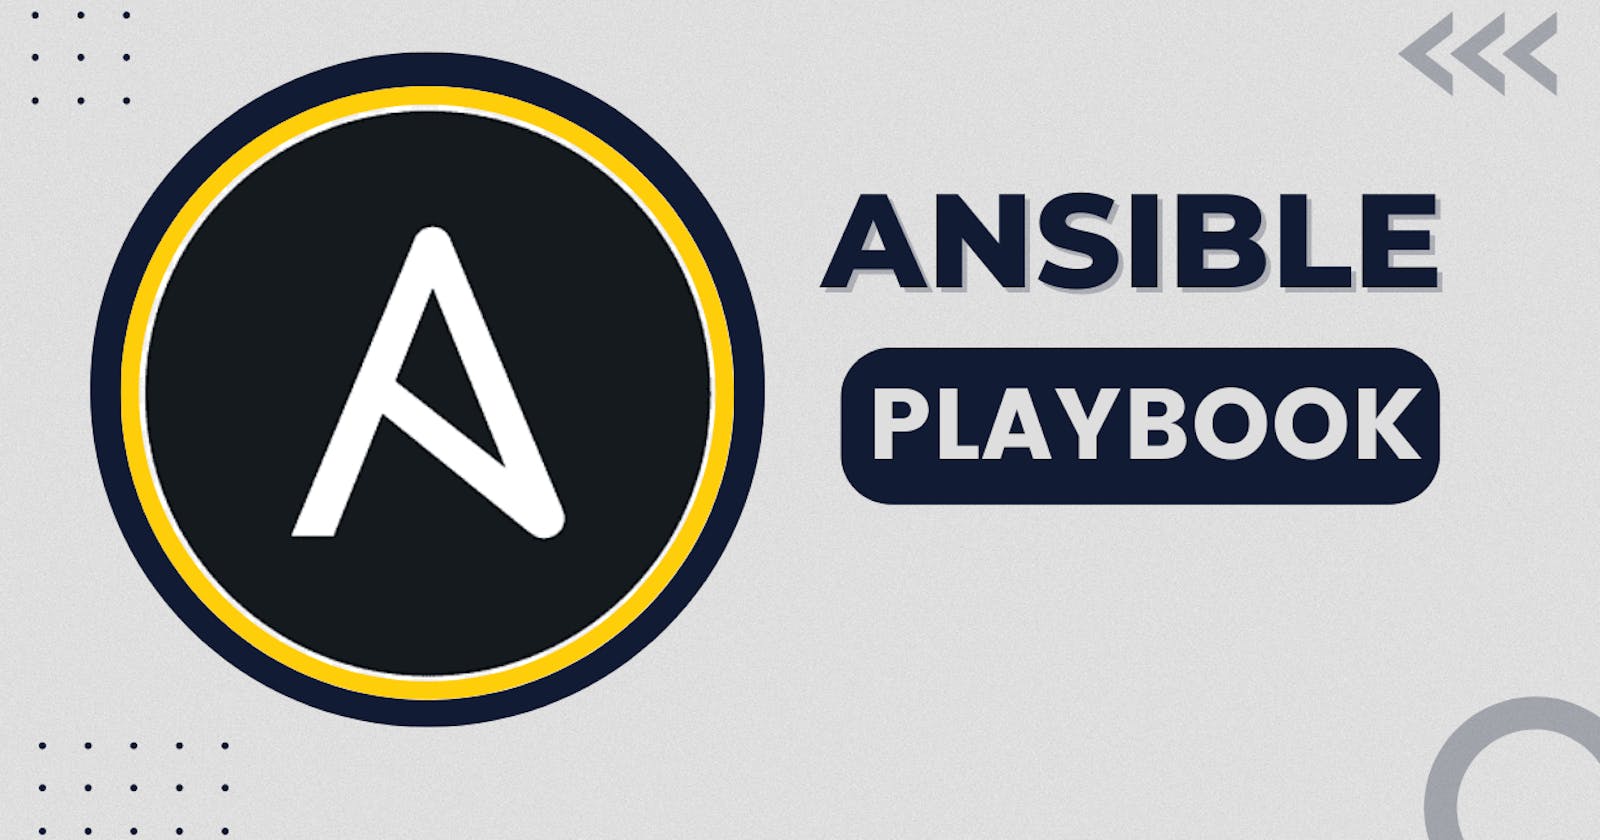 Ansible Playbook